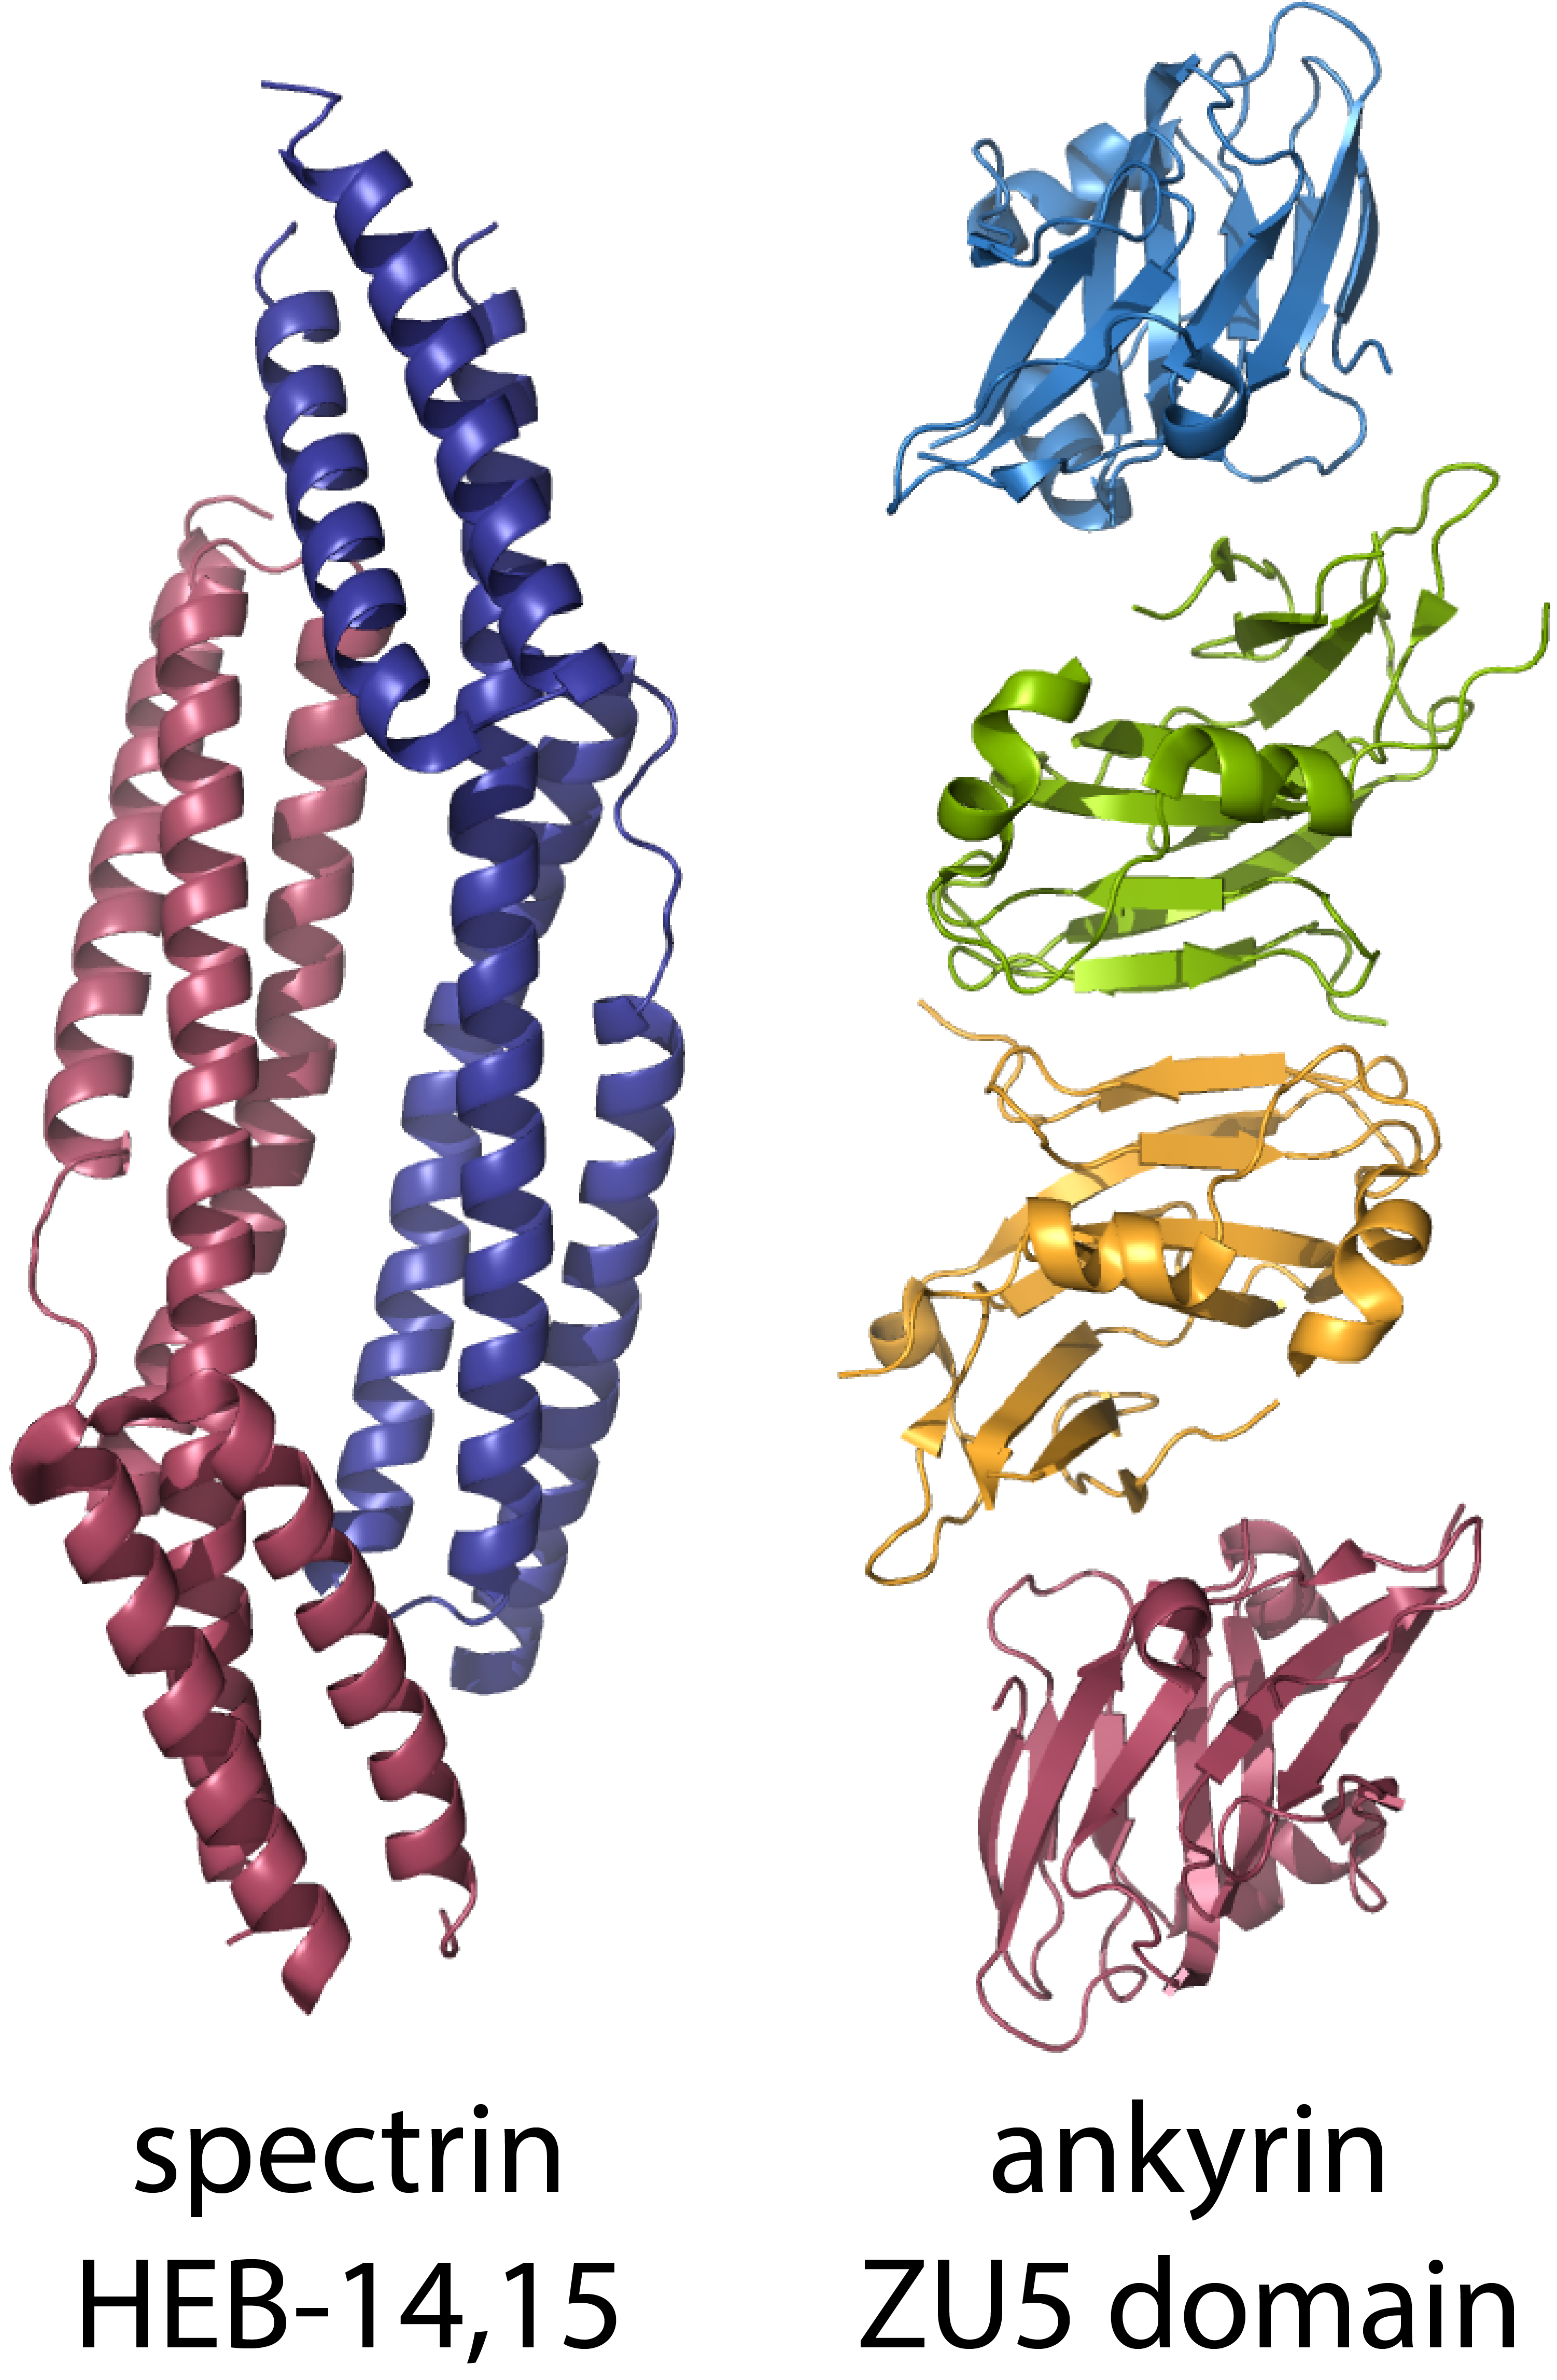 Structures of the spectrin-ankyrin interacting domains